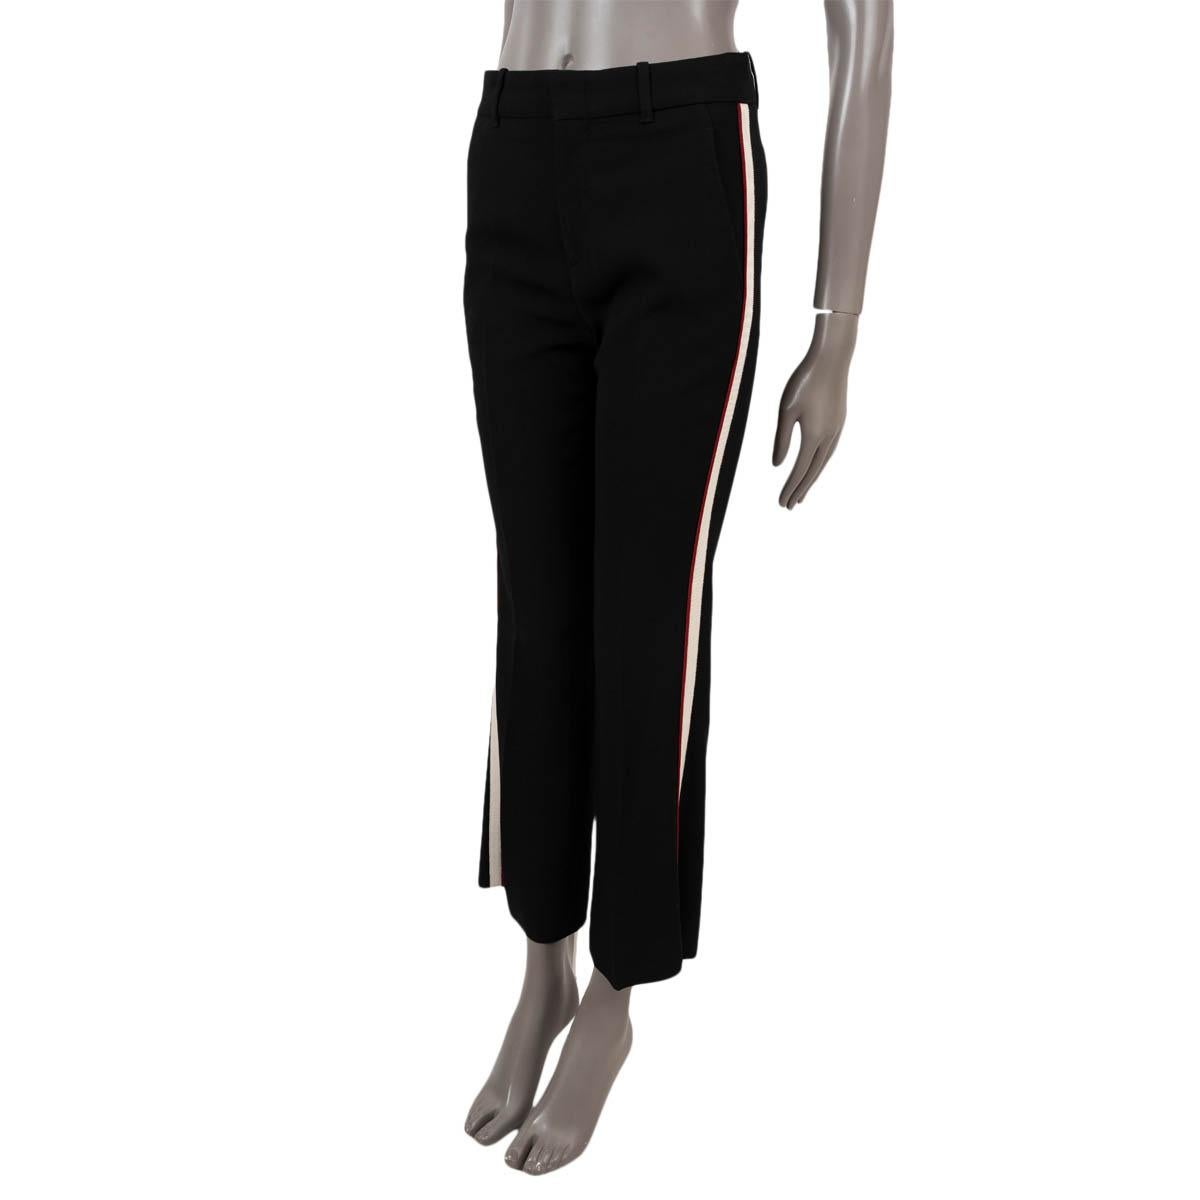 100% authentic Gucci stretch cady pants in black viscose (with 3% elastane). Features boot cut, cropped legs, ivory and red grosgrain side stripe, two slant pockets and two button back pockets. Open with a concealed hook and zipper. Has been worn